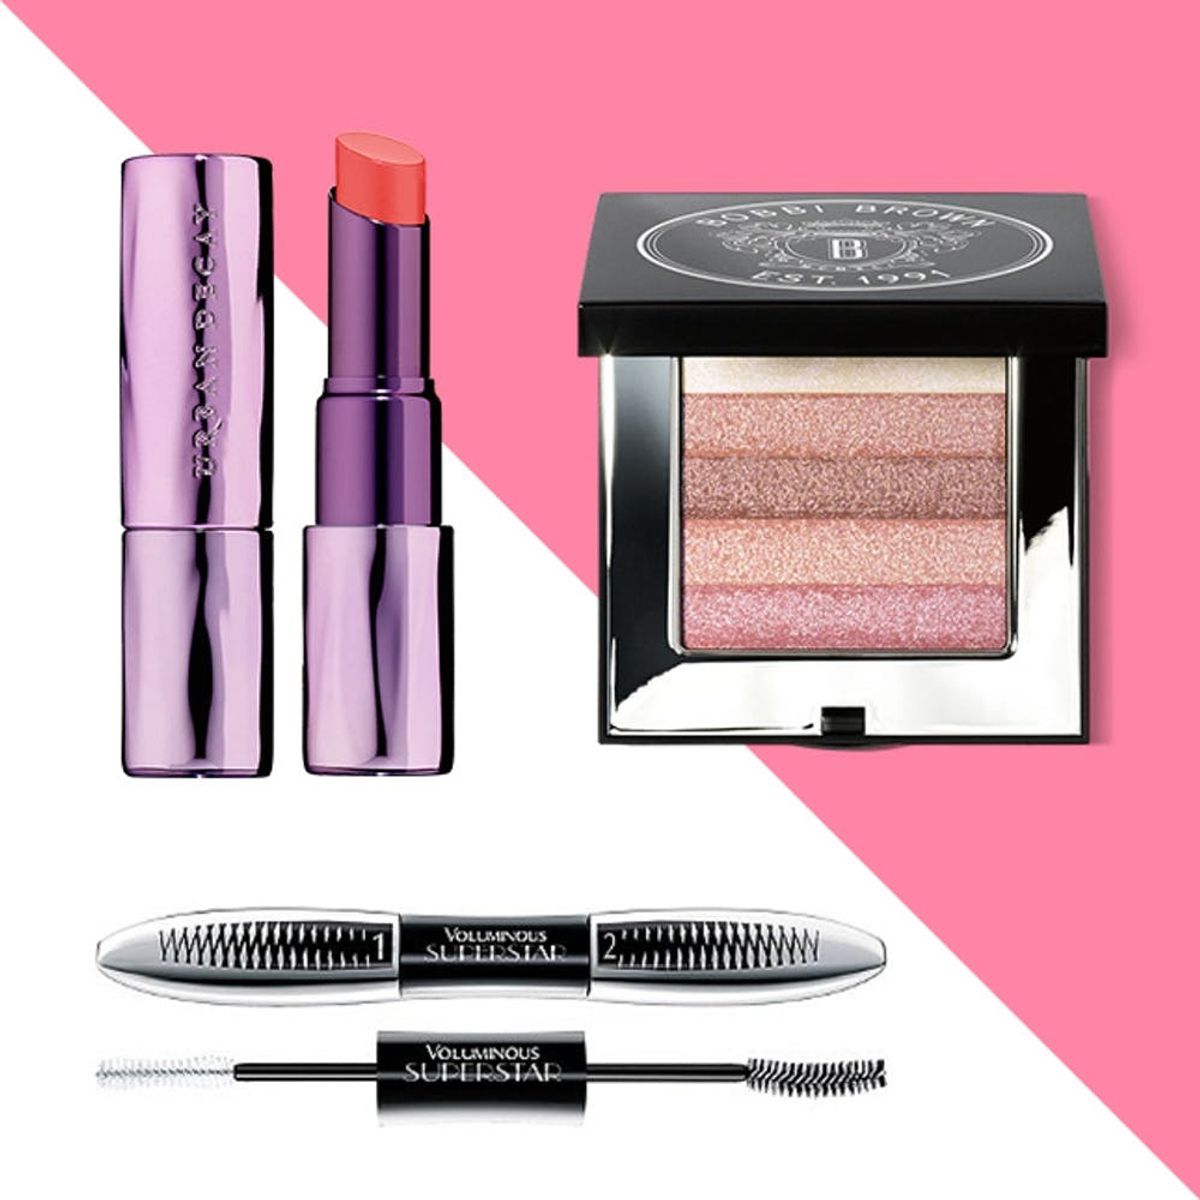 3 New Makeup Essentials You Should Try This Weekend